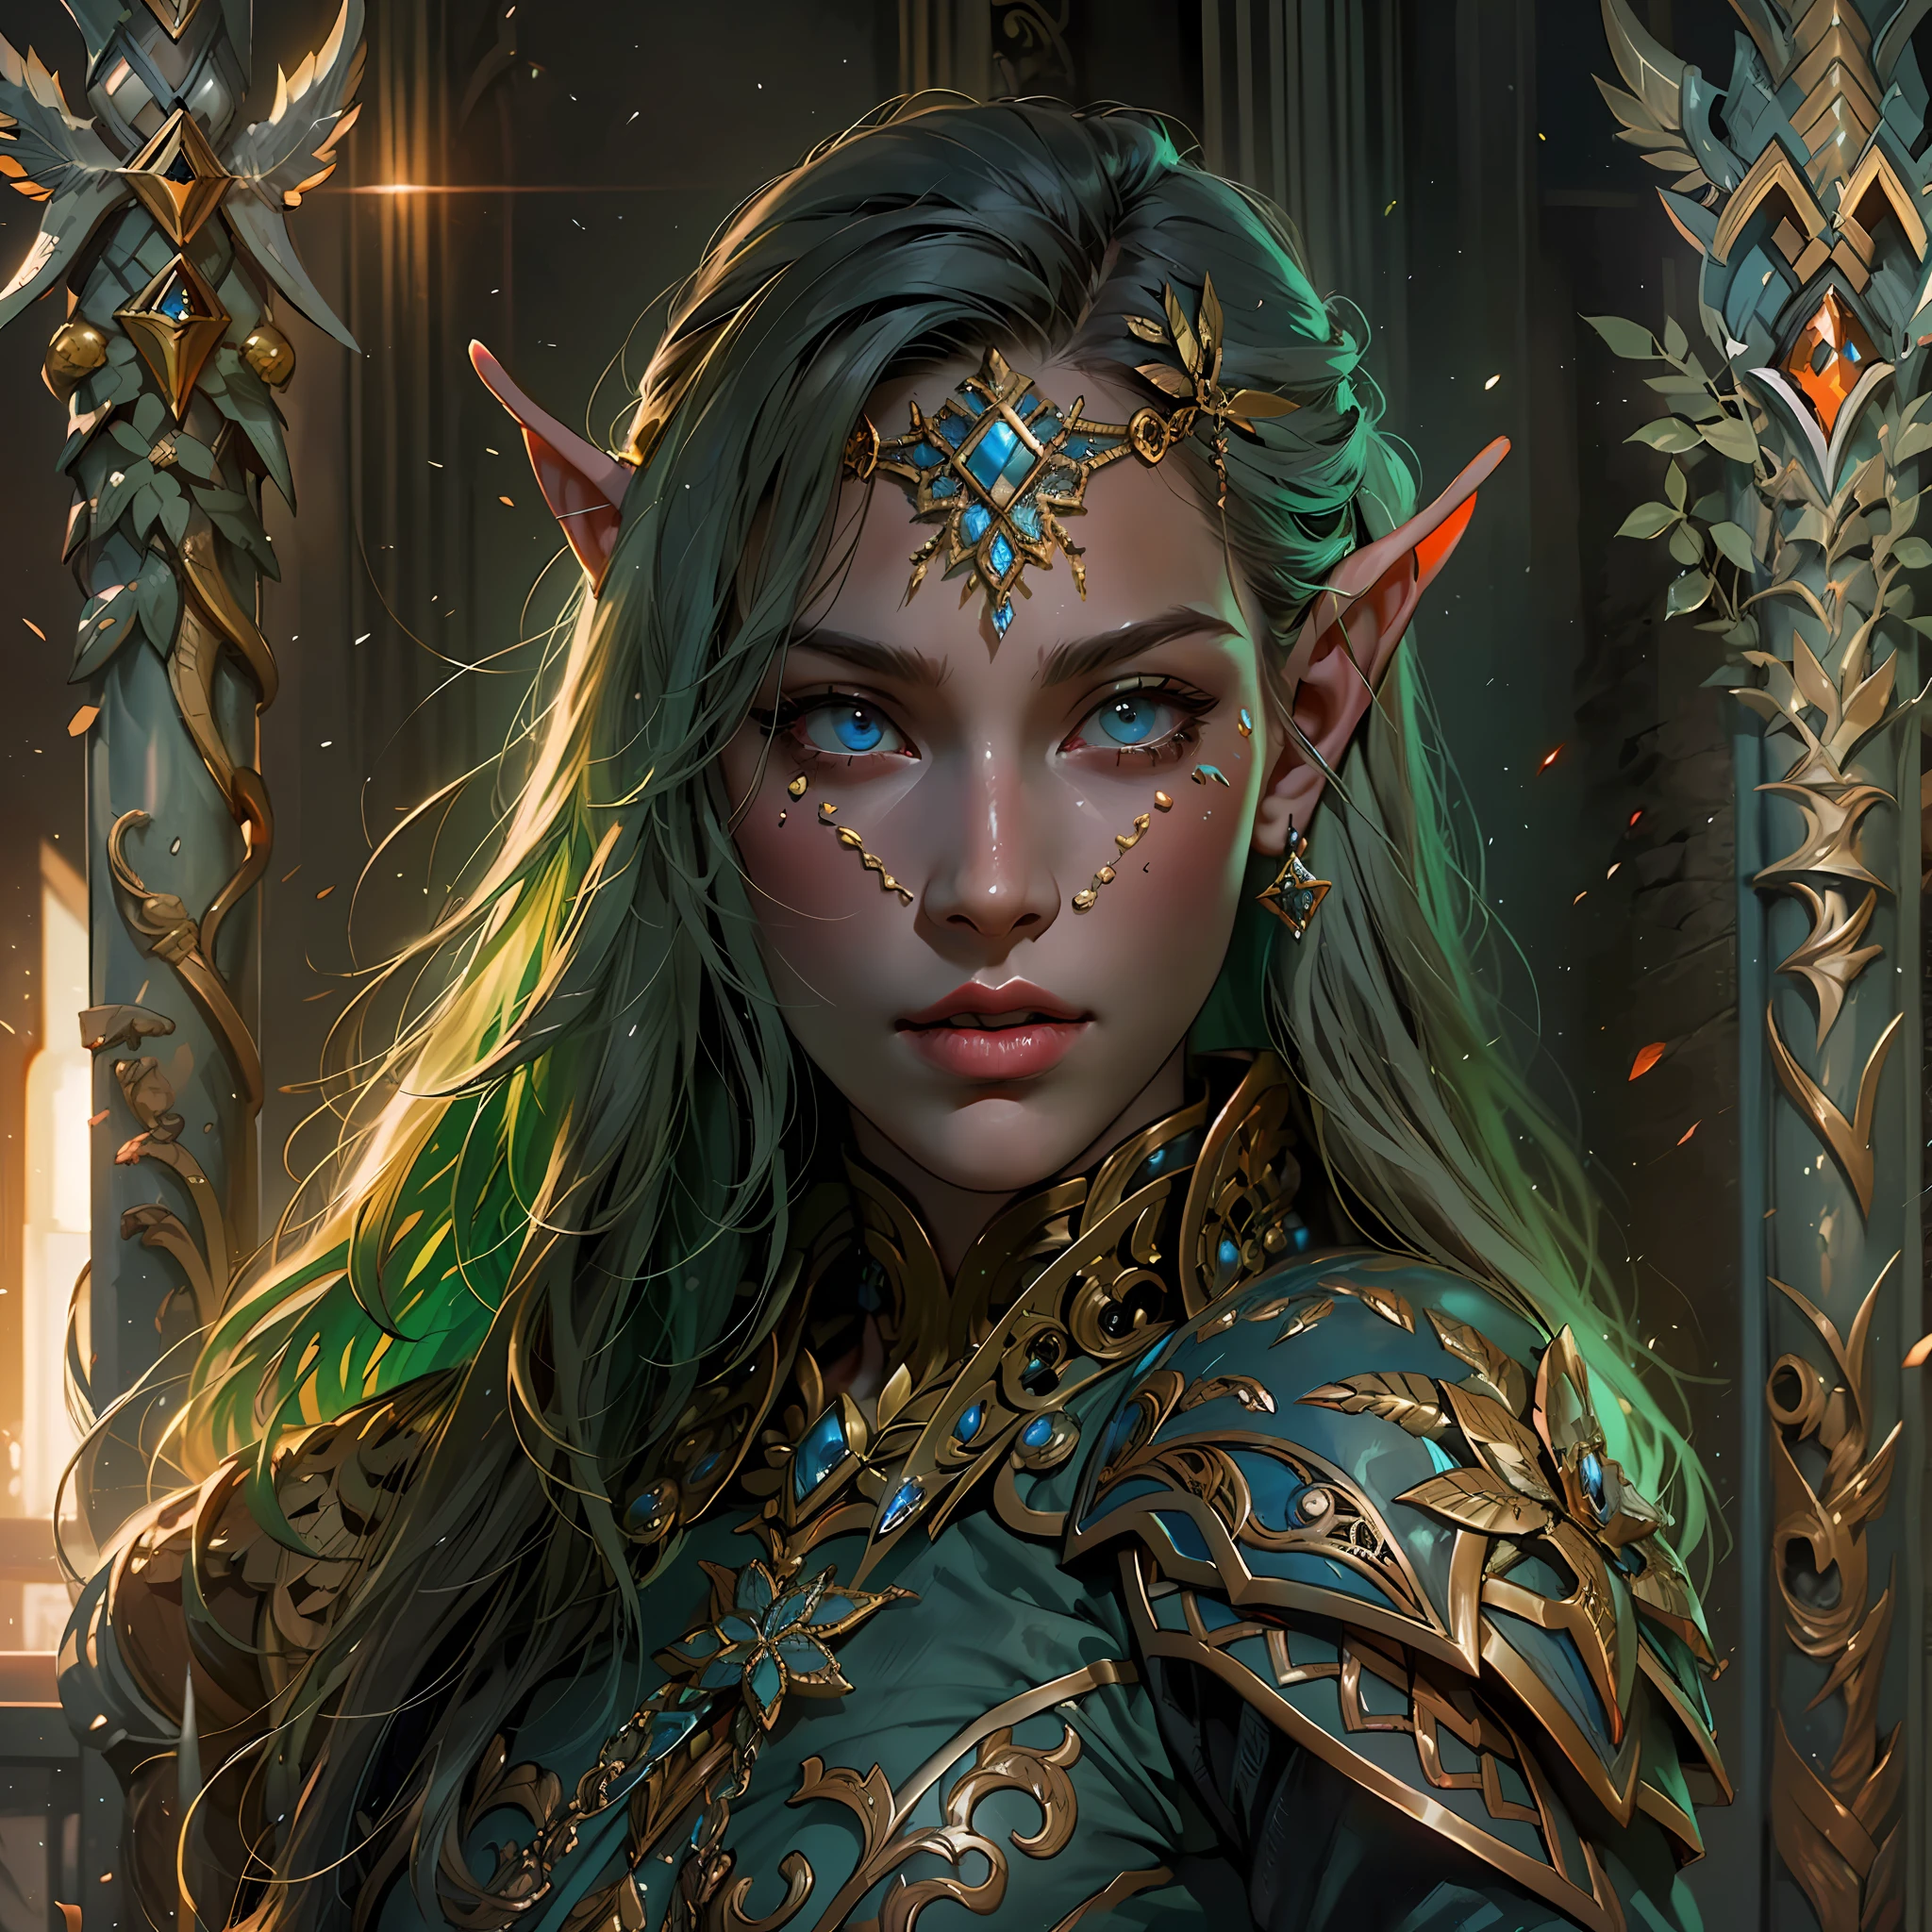 high details, best quality, 8k, [ultra detailed], masterpiece, best quality, (extremely detailed), dynamic angle, ultra wide shot, RAW, photorealistic, fantasy art, dnd art, rpg art, realistic art, a wide angle picture of an epic female elf arcane warrior, warrior of magic, fighter of the arcana, full body, [[anatomically correct]] full body (1.5 intricate details, Masterpiece, best quality) casting a spell (1.5 intricate details, Masterpiece, best quality), casting an epic spell, [colorful magical sigils in the air],[ colorful arcane markings floating] (1.6 intricate details, Masterpiece, best quality) holding an [epic magical elven sword with sigils] (1.5 intricate details, Masterpiece, best quality) holding epic [[magical sword glowing in red light]] (1.5 intricate details, Masterpiece, best quality). in fantasy urban street (1.5 intricate details, Masterpiece, best quality), a female beautiful epic elf wearing elven leather armor (1.4 intricate details, Masterpiece, best quality), high heeled leather boots, ultra detailed face, thick hair, long hair, dynamic hair, fair skin intense eyes, fantasy city background (intense details), sun light, backlight, depth of field (1.4 intricate details, Masterpiece, best quality), dynamic angle, (1.4 intricate details, Masterpiece, best quality) 3D rendering, high details, best quality, highres, ultra wide angle